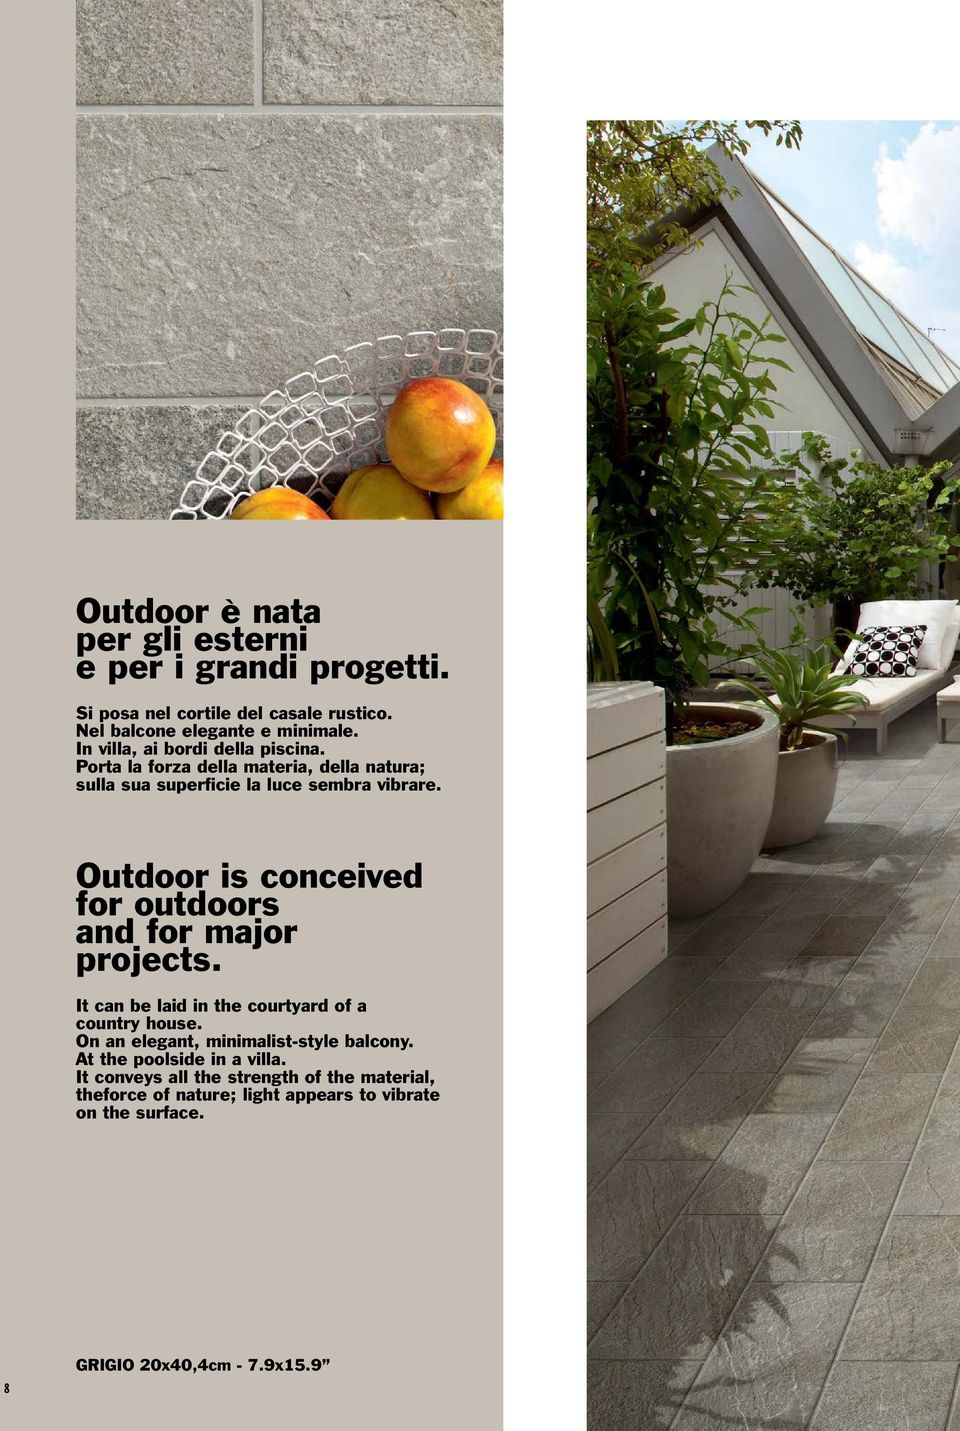 Outdoor is conceived for outdoors and for major projects. It can be laid in the courtyard of a country house.